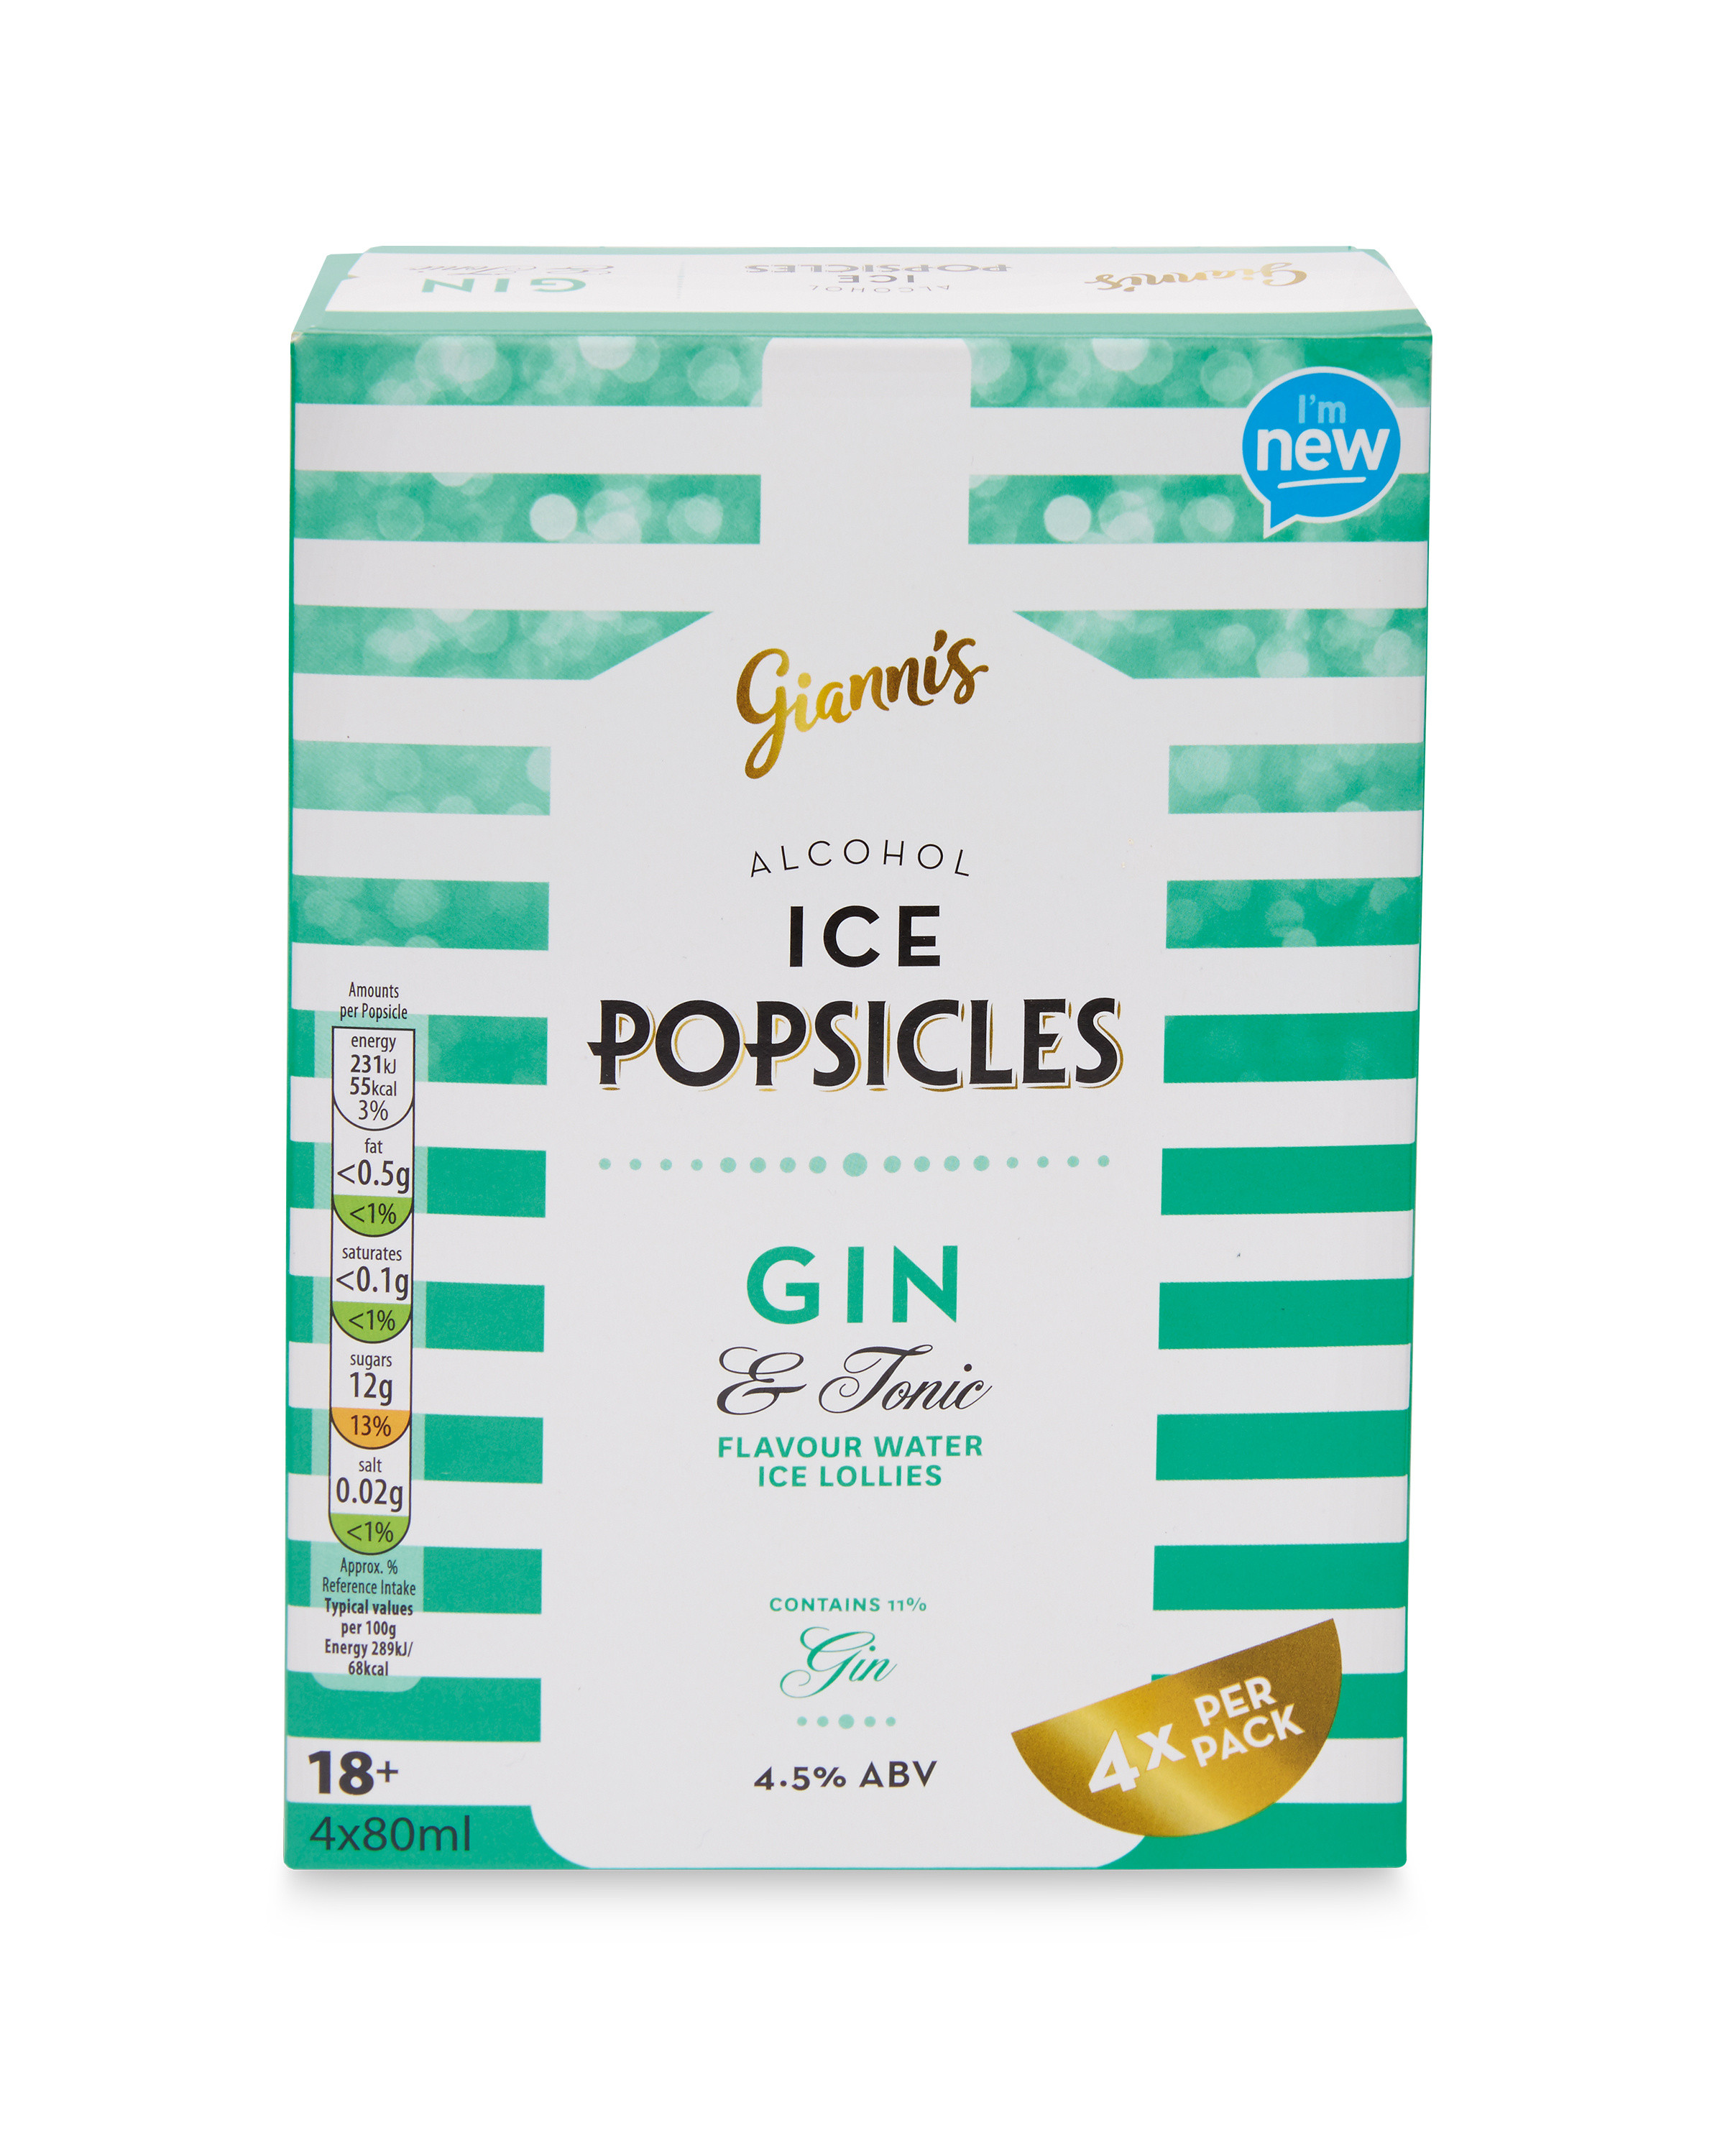 Gin-&-Tonic-Popsicle